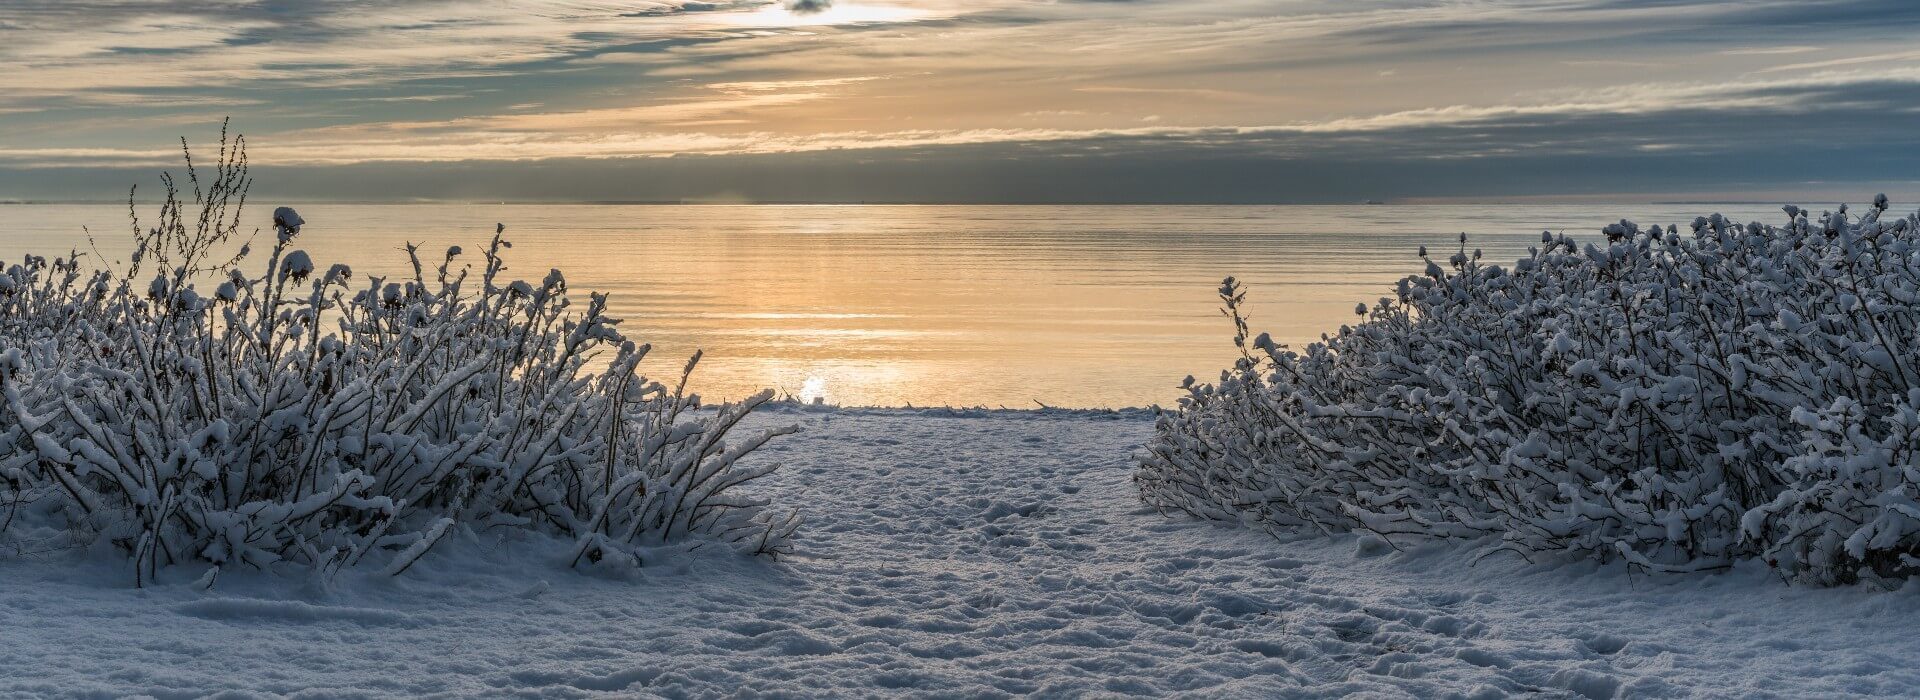 Beach of an ocean during winter with two small bushes covered in snow